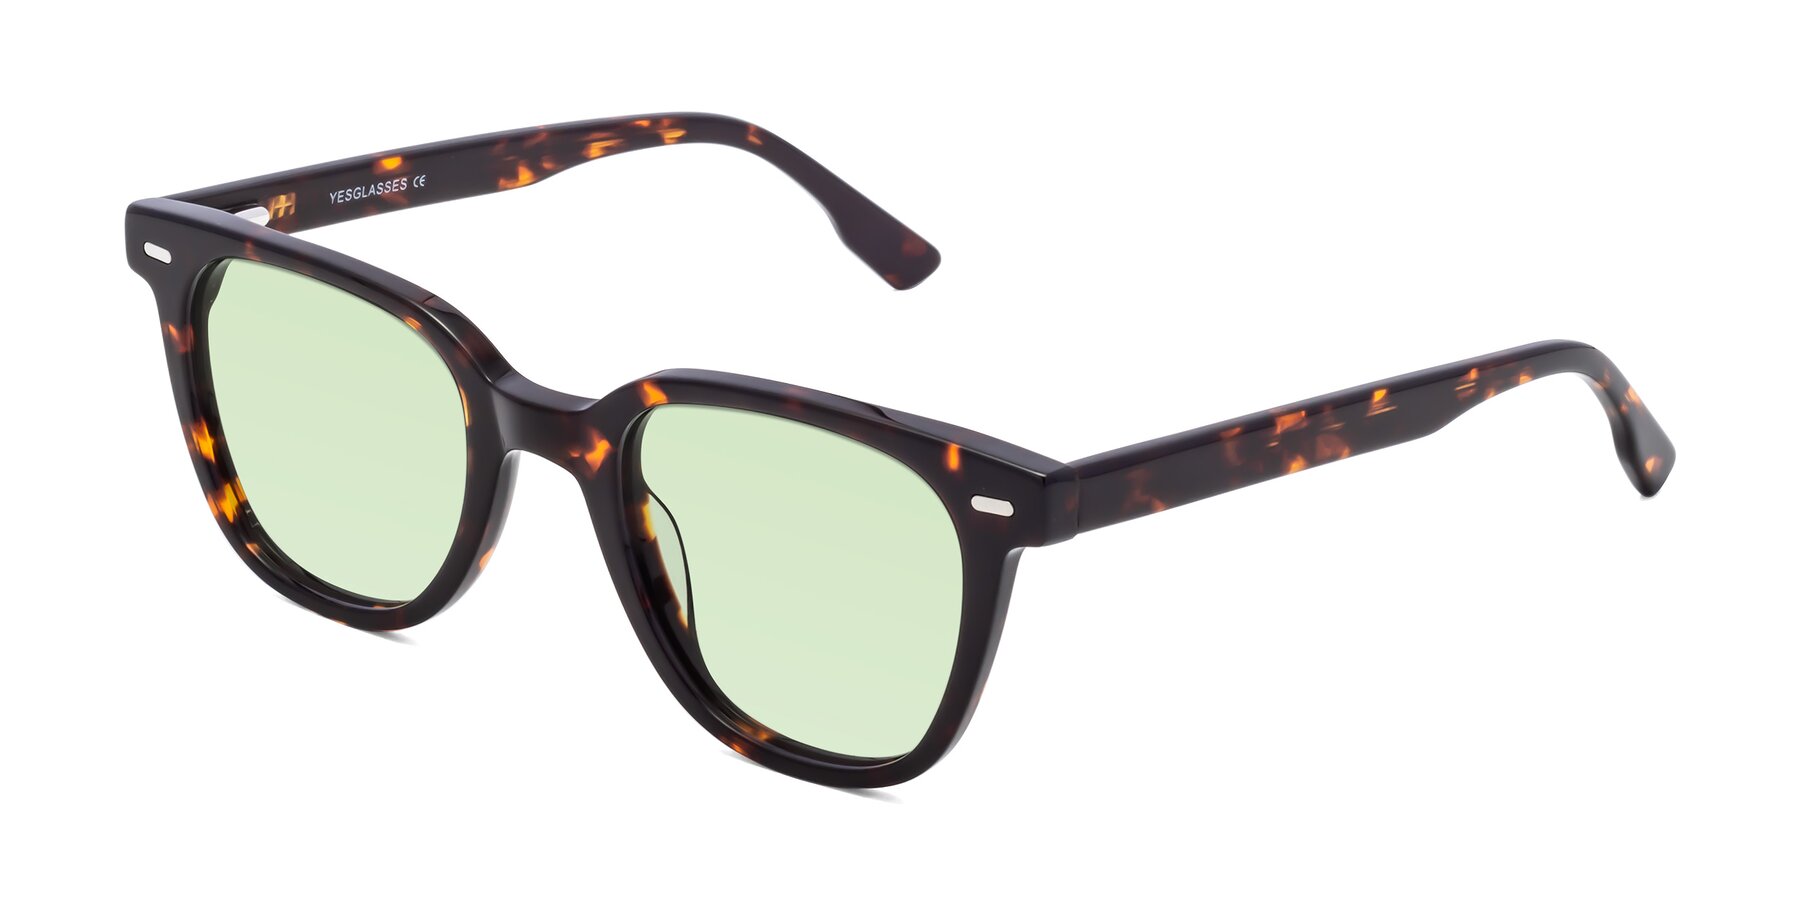 Angle of Beacon in Tortoise with Light Green Tinted Lenses